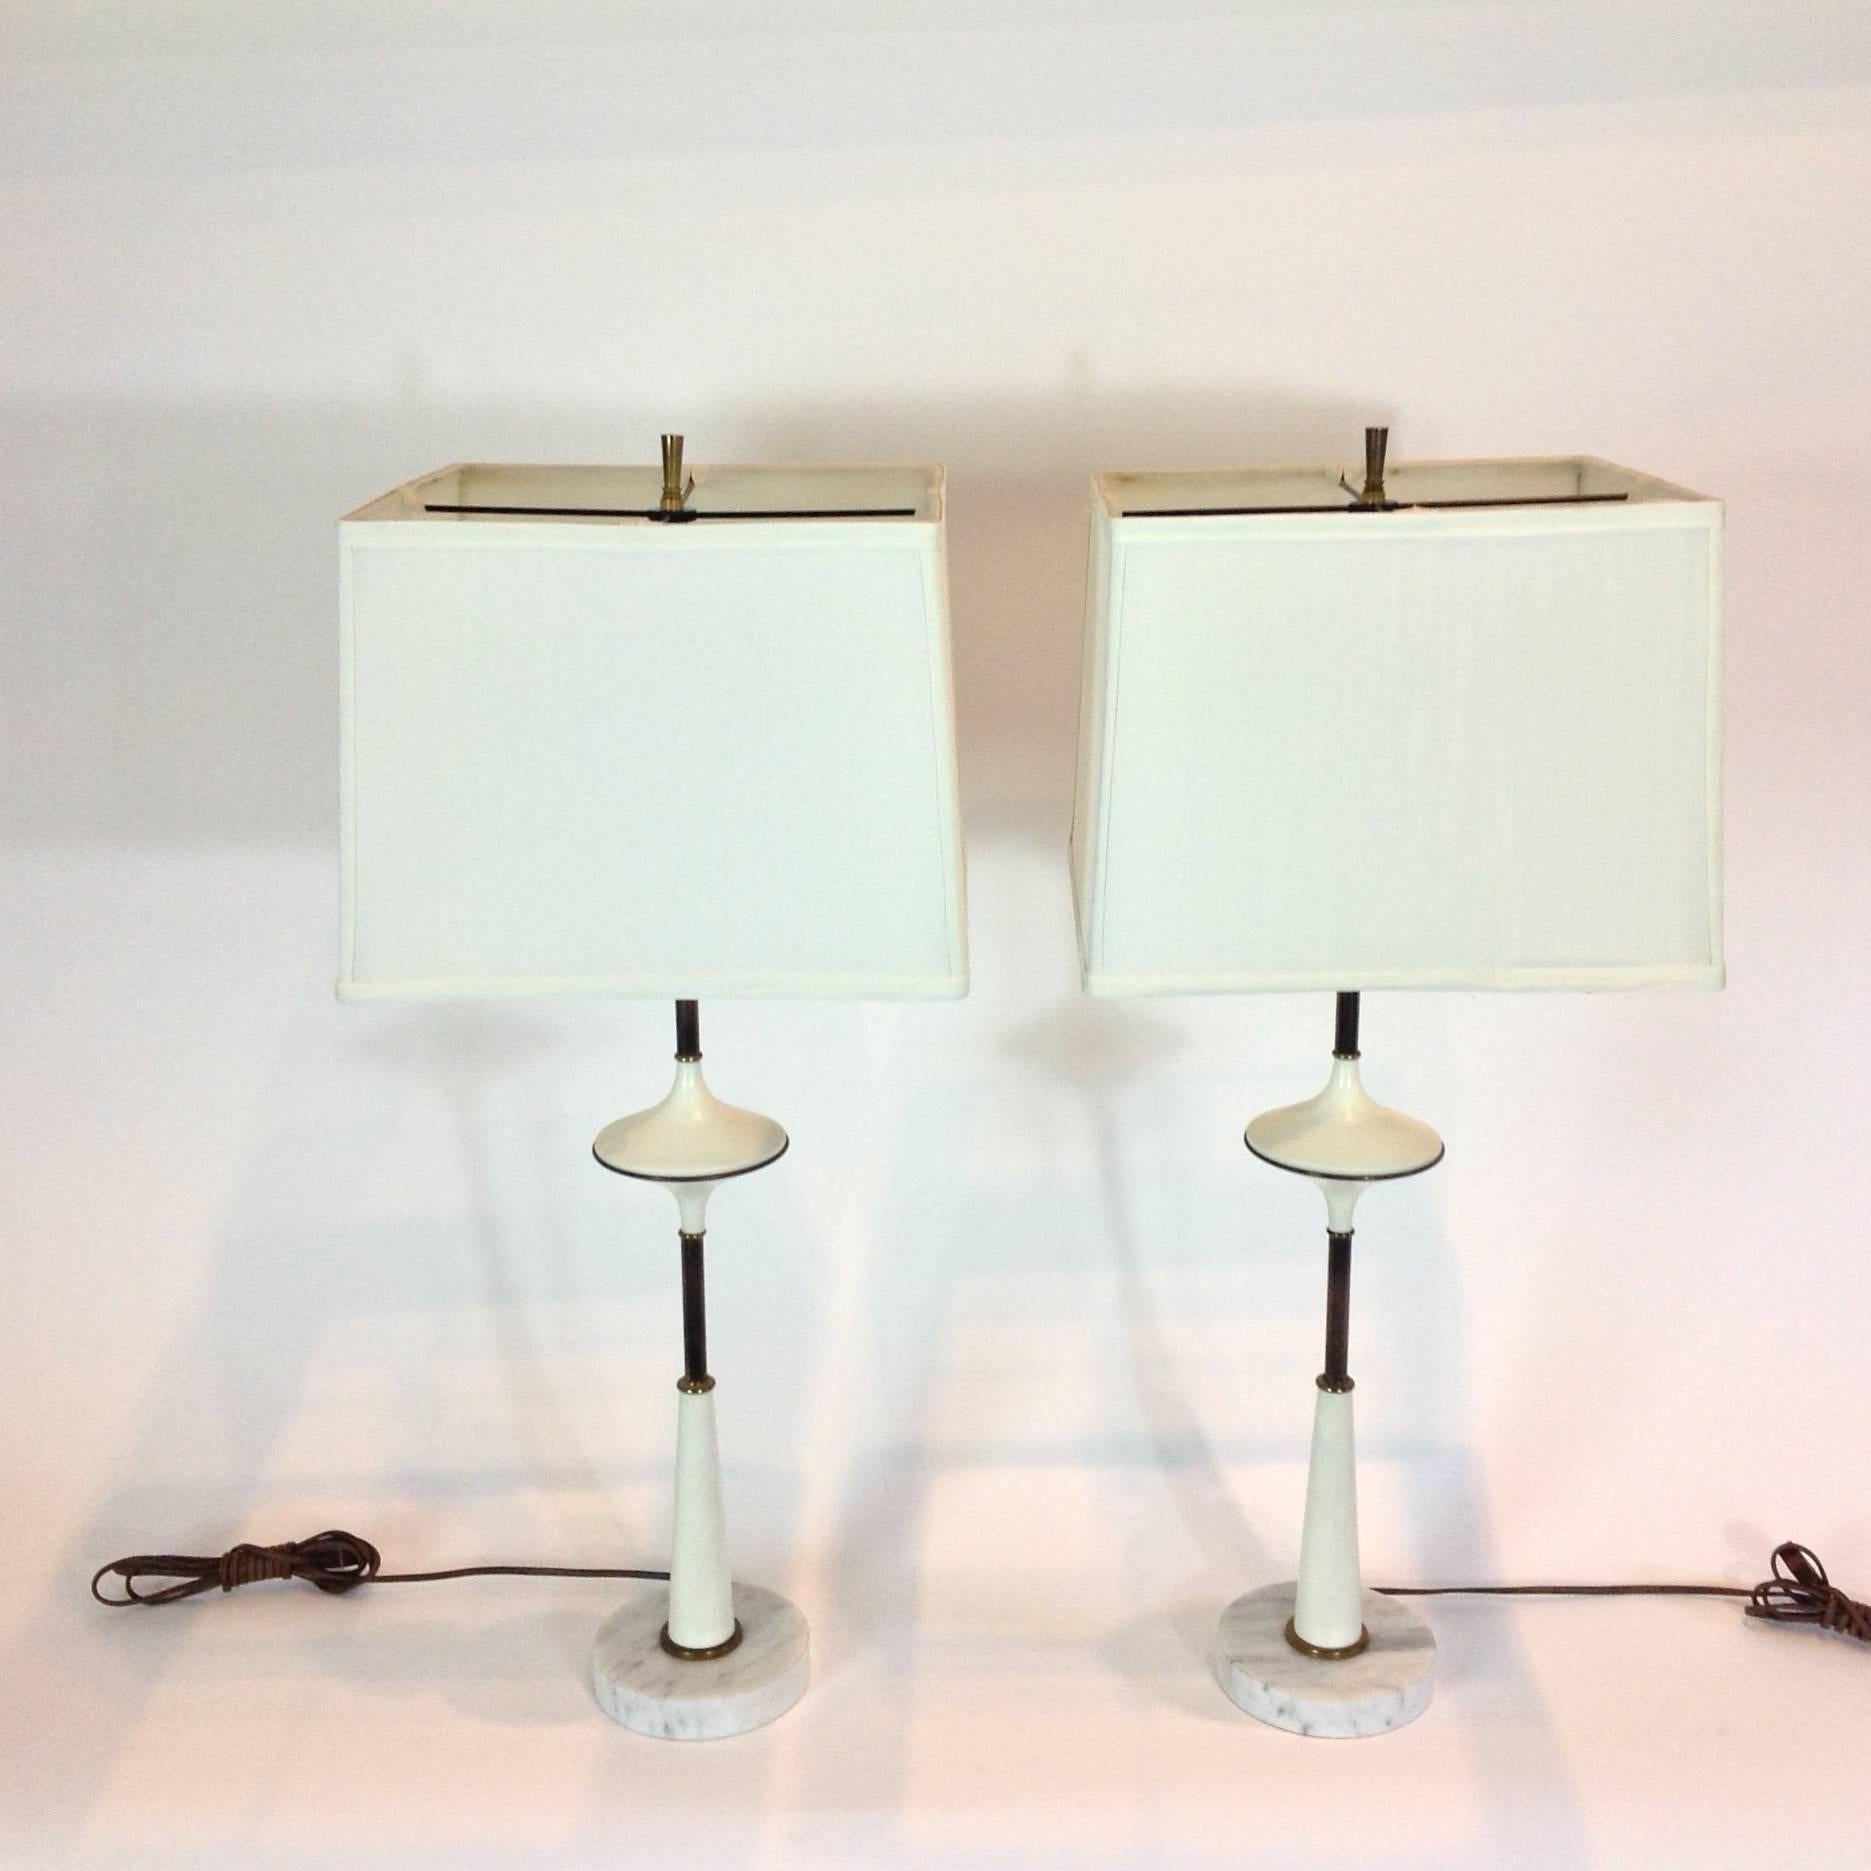 Wonderful pair of black and white enameled metal lamps accented with brass rings and marble bases. Original wiring in working condition. Sold with or without the shades.
Height shown is to top of finials, height to sockets is 19 inches.